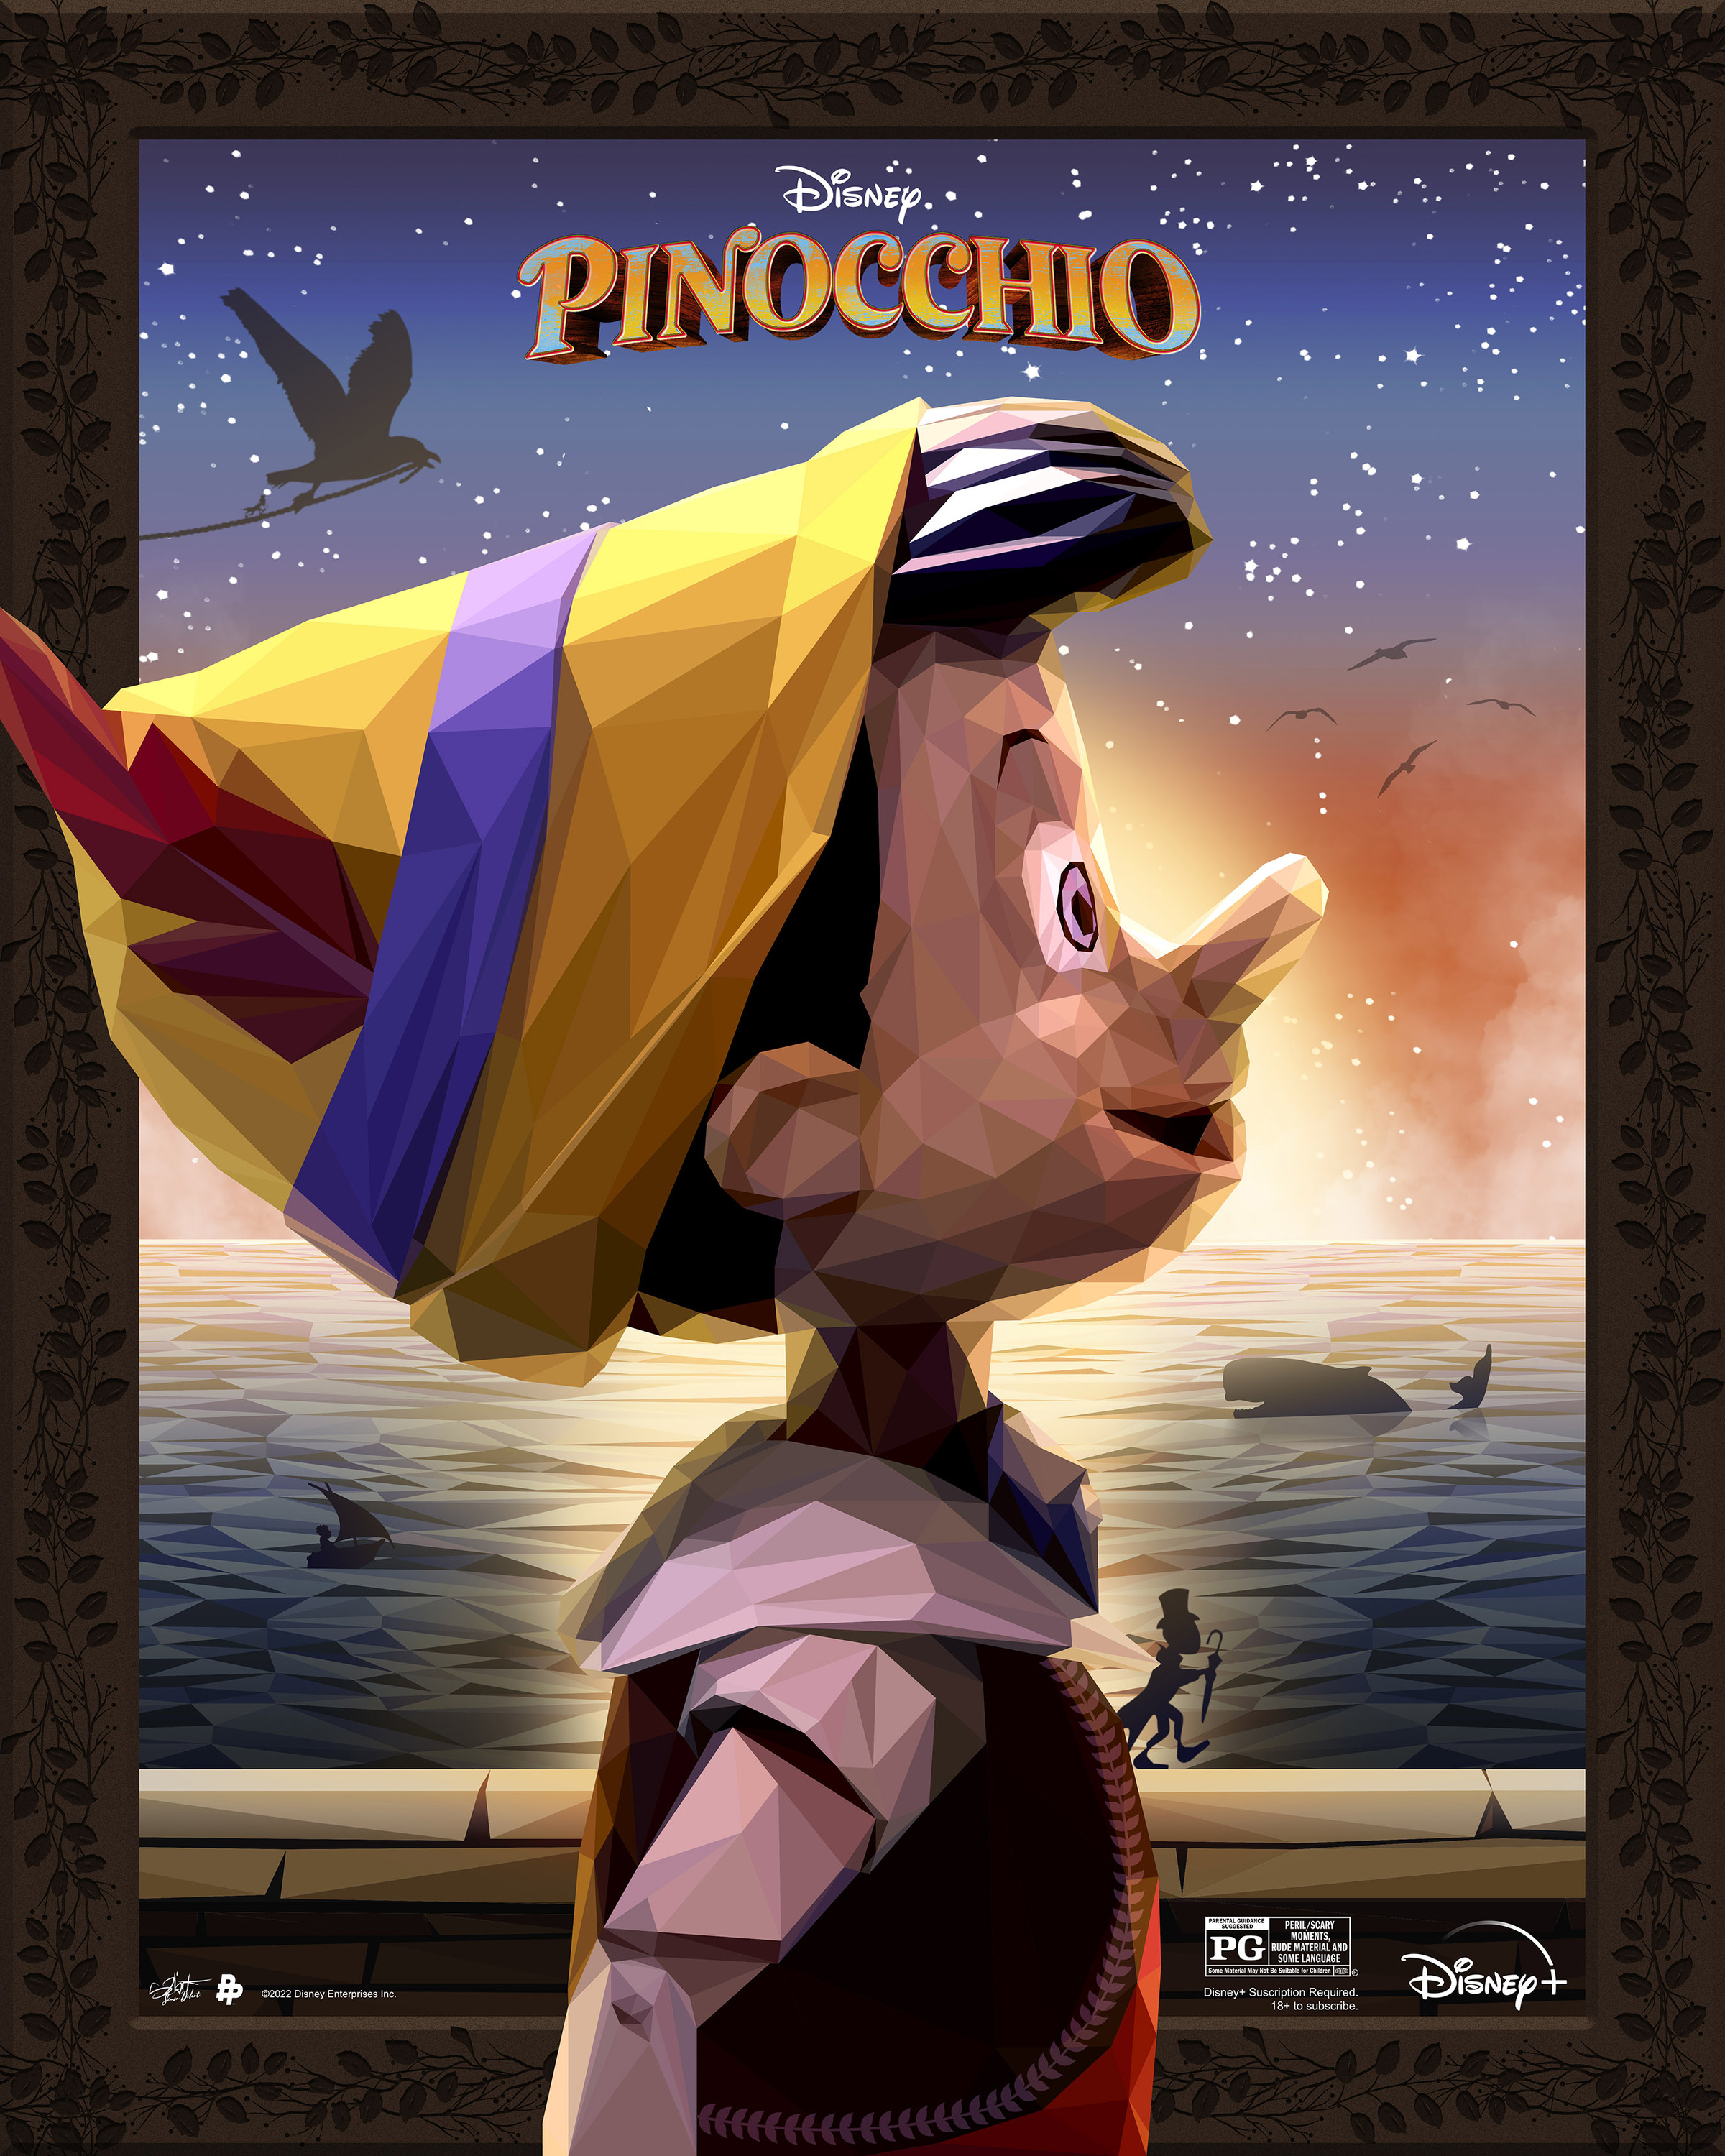 Mega Sized Movie Poster Image for Pinocchio (#17 of 17)